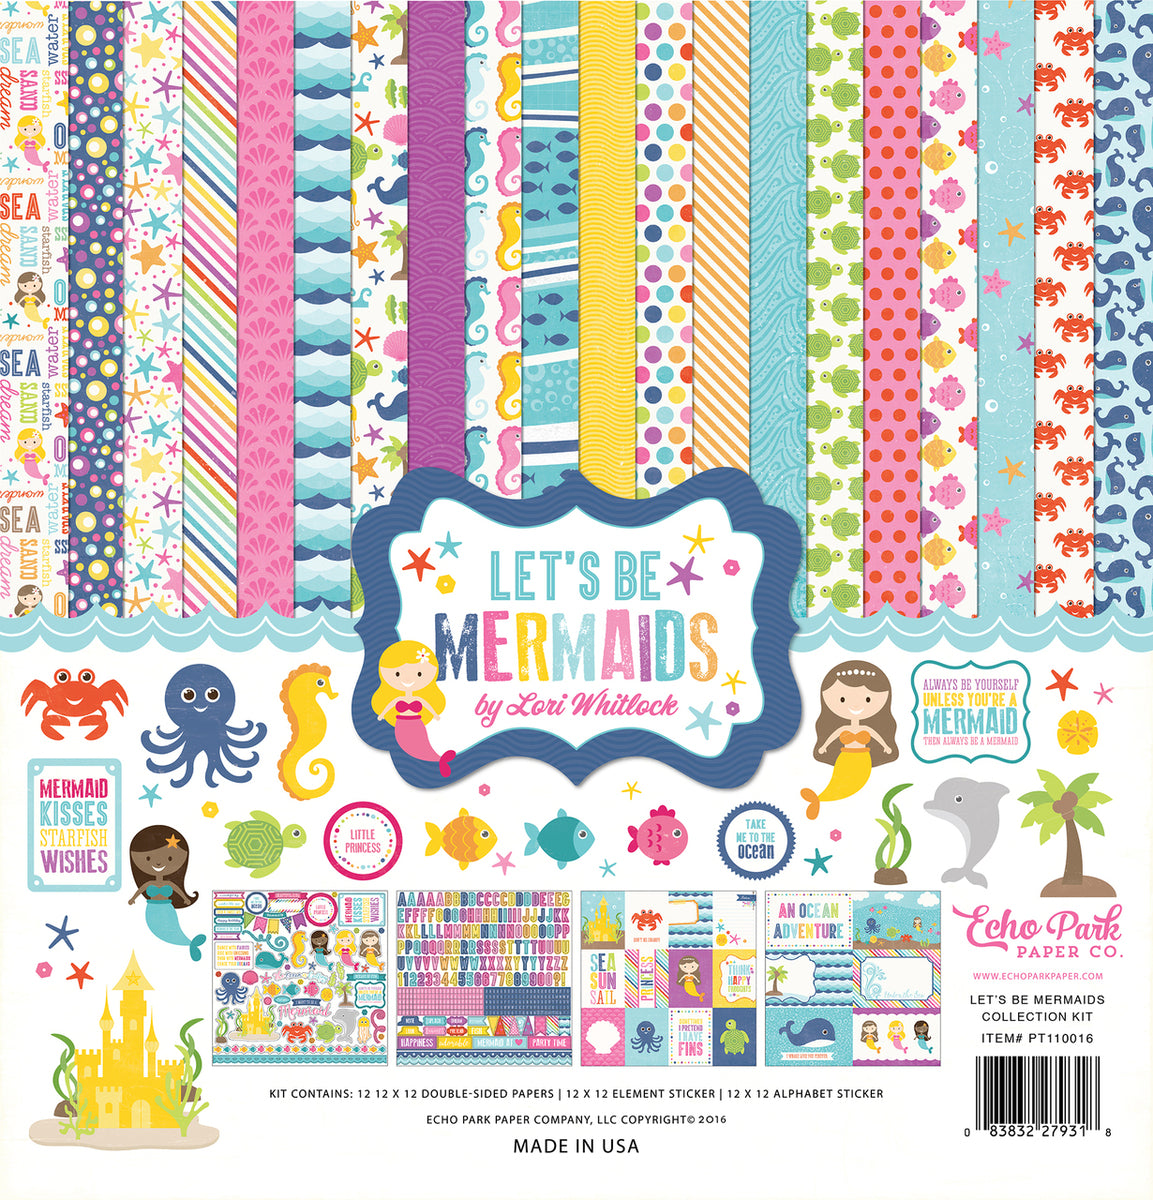 Let's Be Mermaids 12x12 collection kit from Echo Park Paper